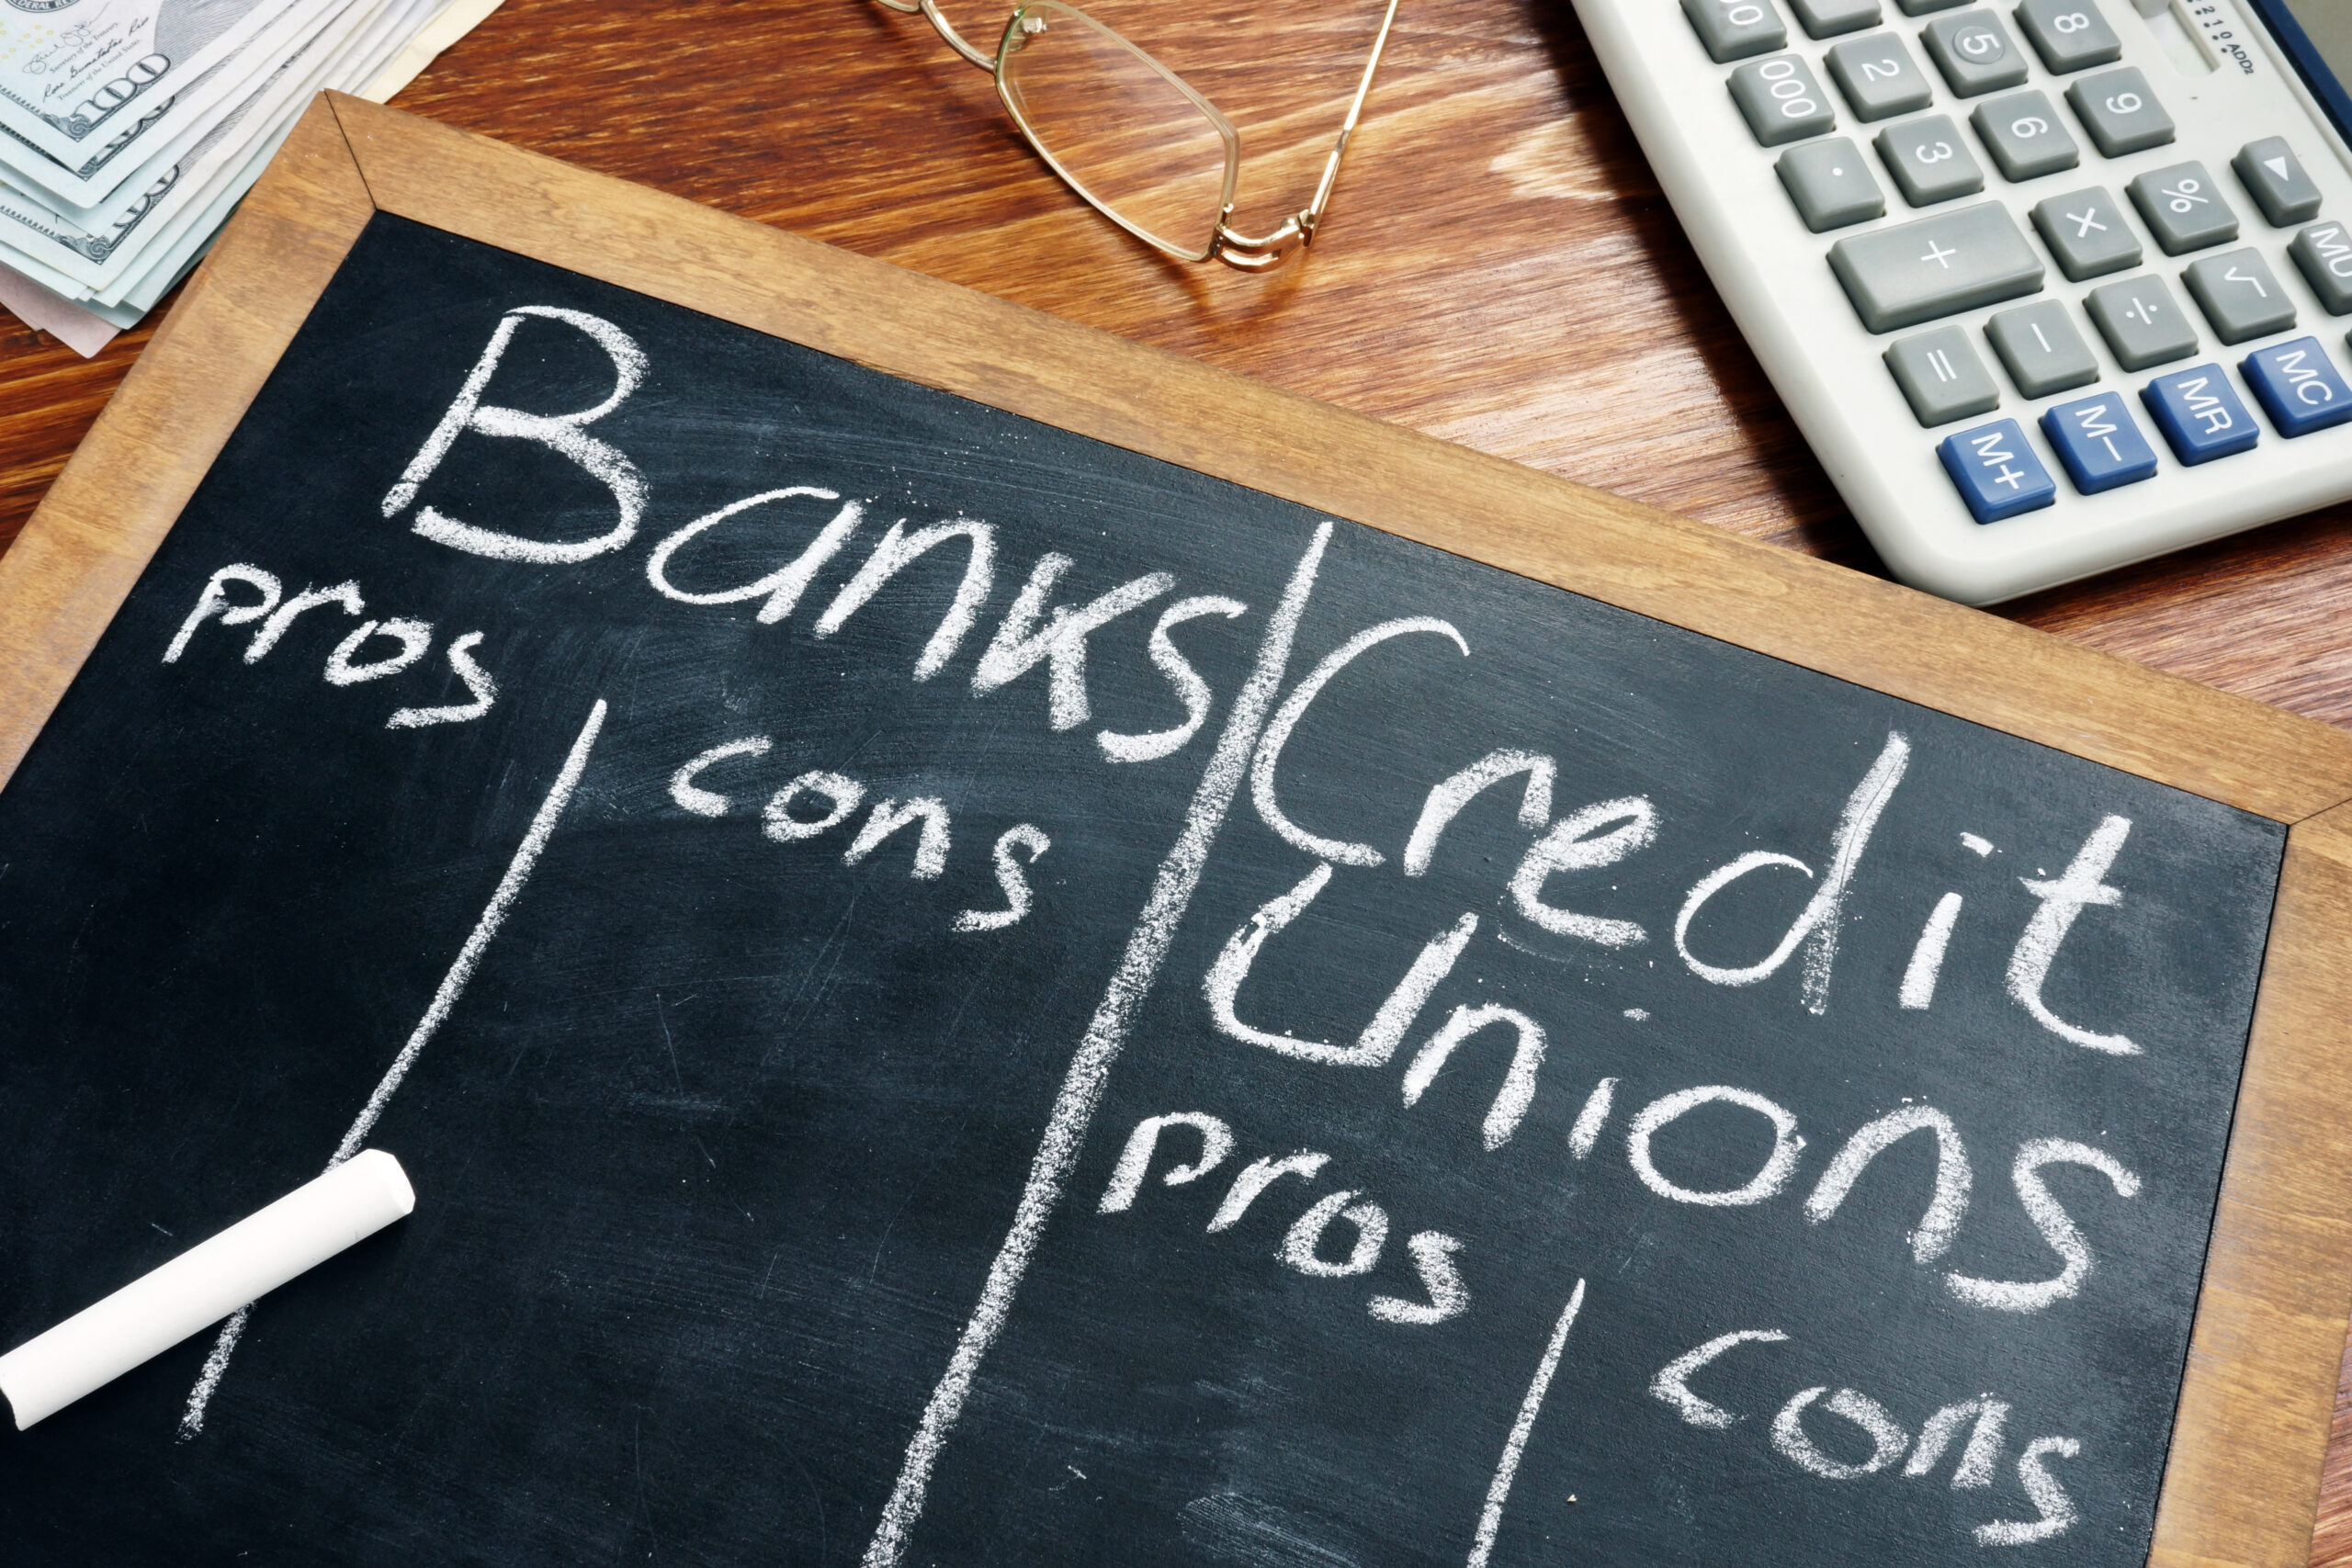 chalk board with the words "banks credit unions" comparing the pros vs cons